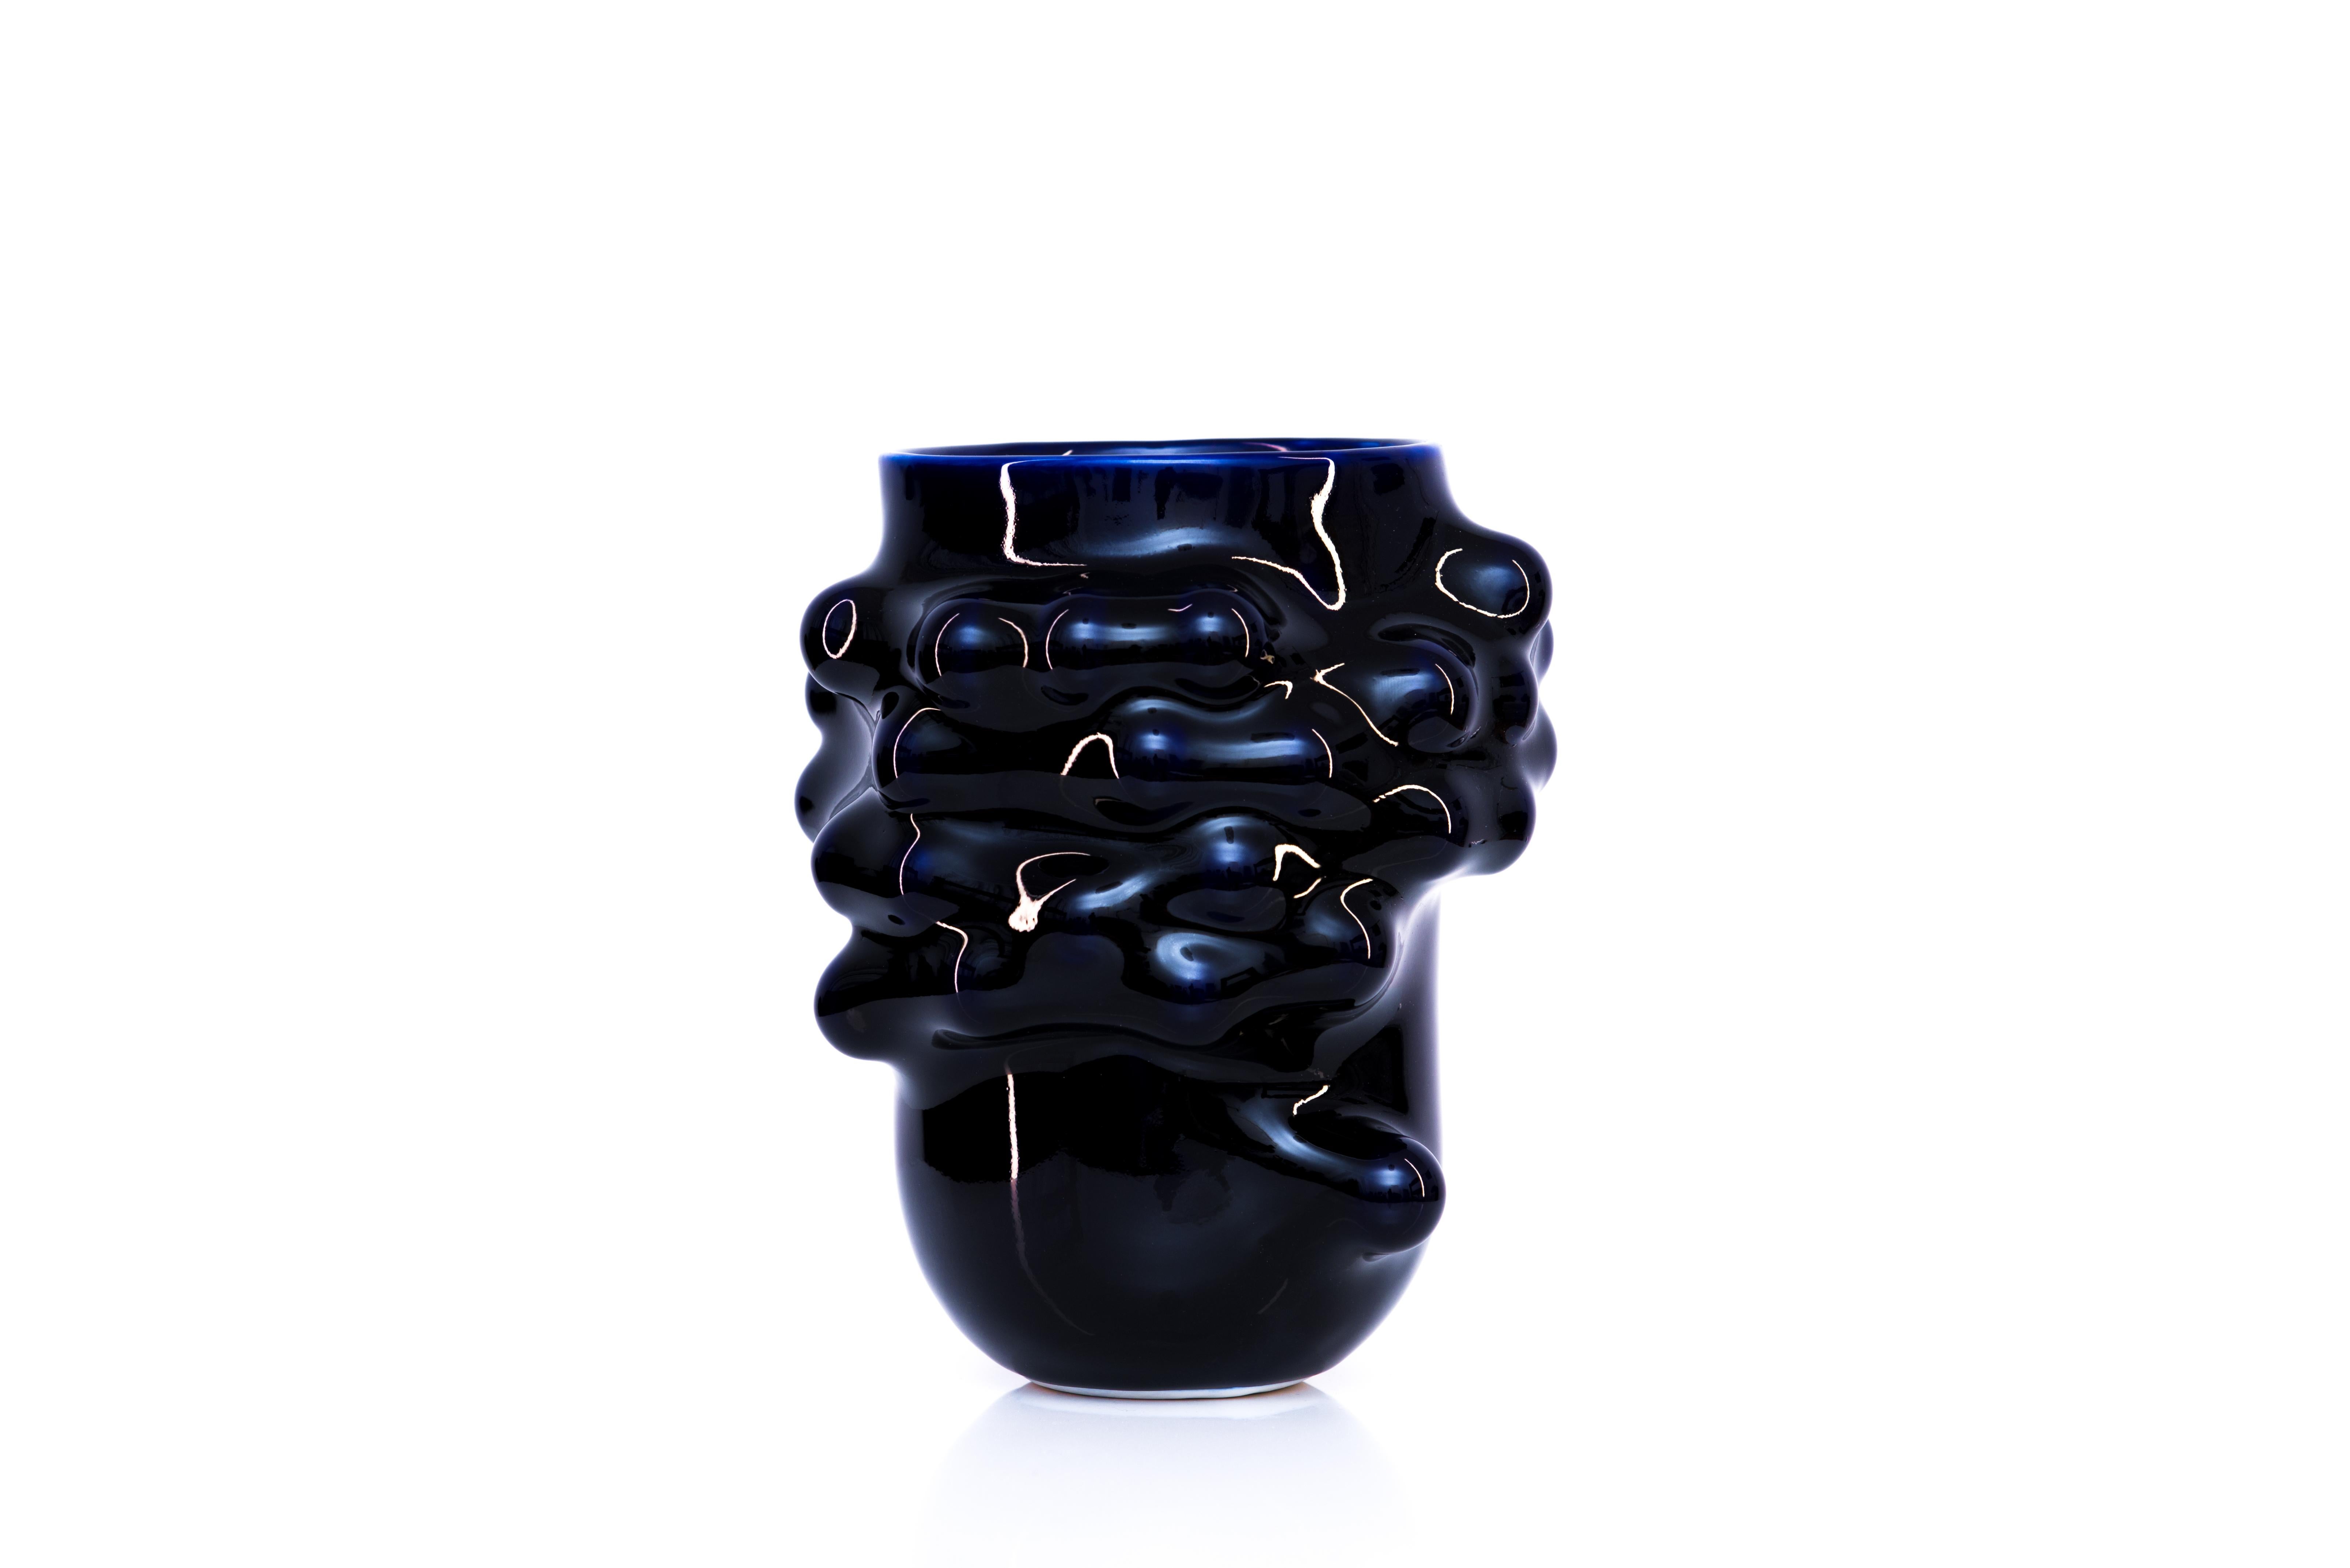 Bumps 2.0 blue cobalt vase by Arkadiusz Szwed
Dimensions: L 16 x W 16 x H 20 cm
Materials: Porcelain

Arkadiusz Szwed designs and produce ceramic products.
He lives in Warsaw / Poland and work at the School of Form as an Instructor and Head of